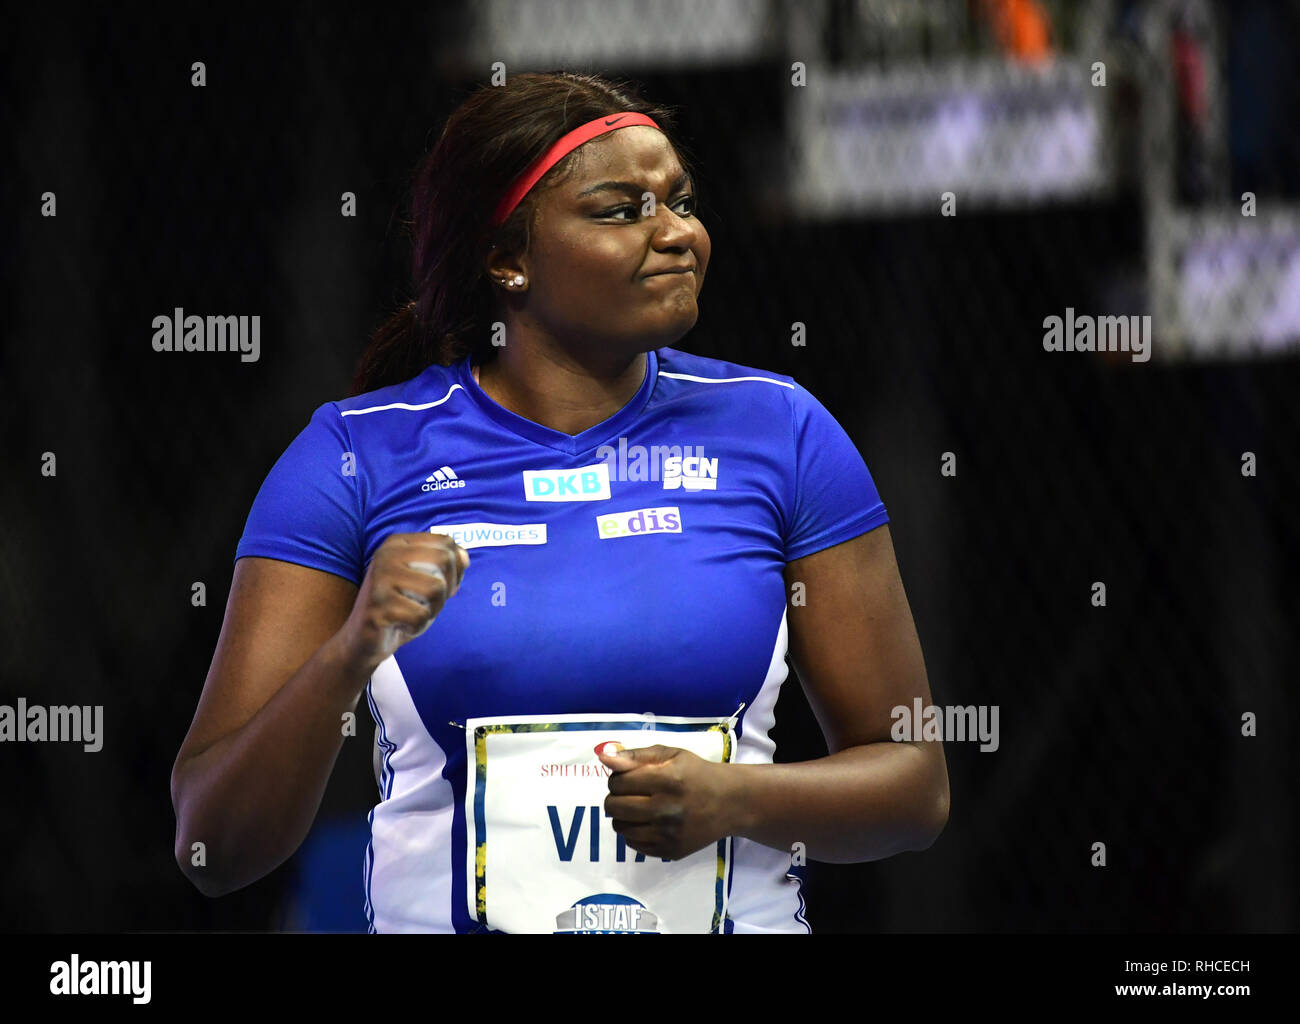 Berlin, Germany. 01st Feb, 2019. ISTAF Indoor, discus throwing, mixed, in the Mercedes-Benz Arena: Claudine Vita (Germany). Credit: Soeren Stache/dpa/Alamy Live News Stock Photo